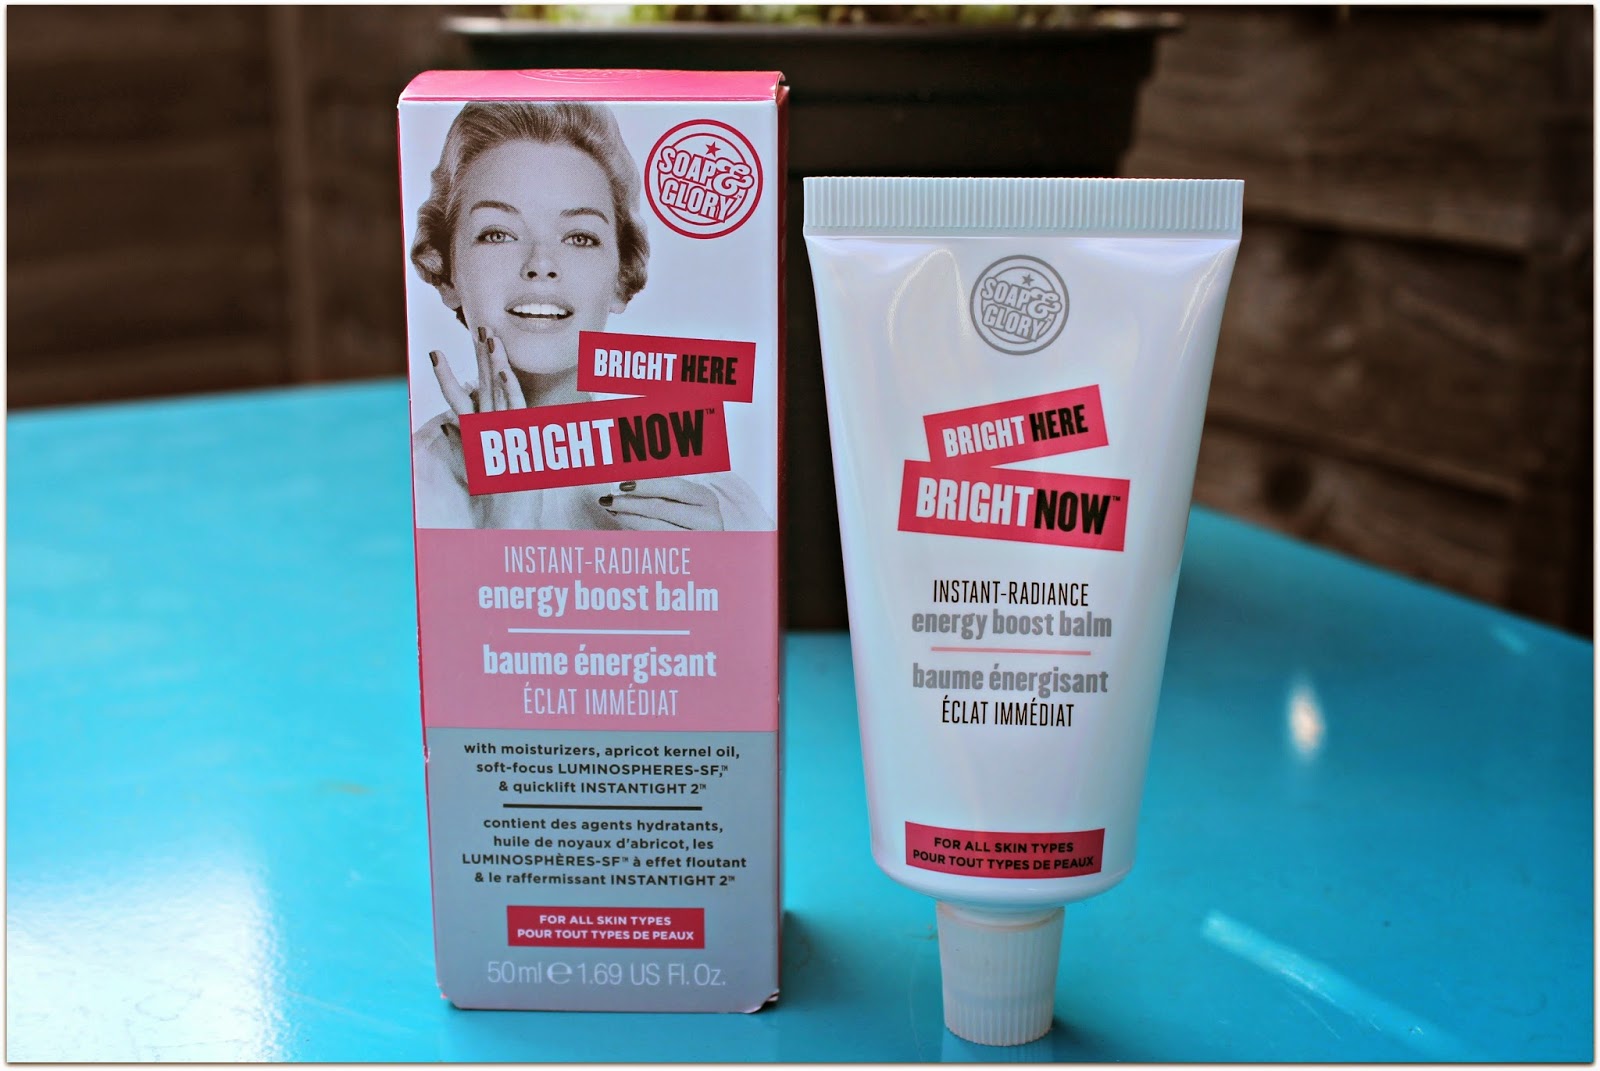 Soap and Glory Bright Here, Bright Now